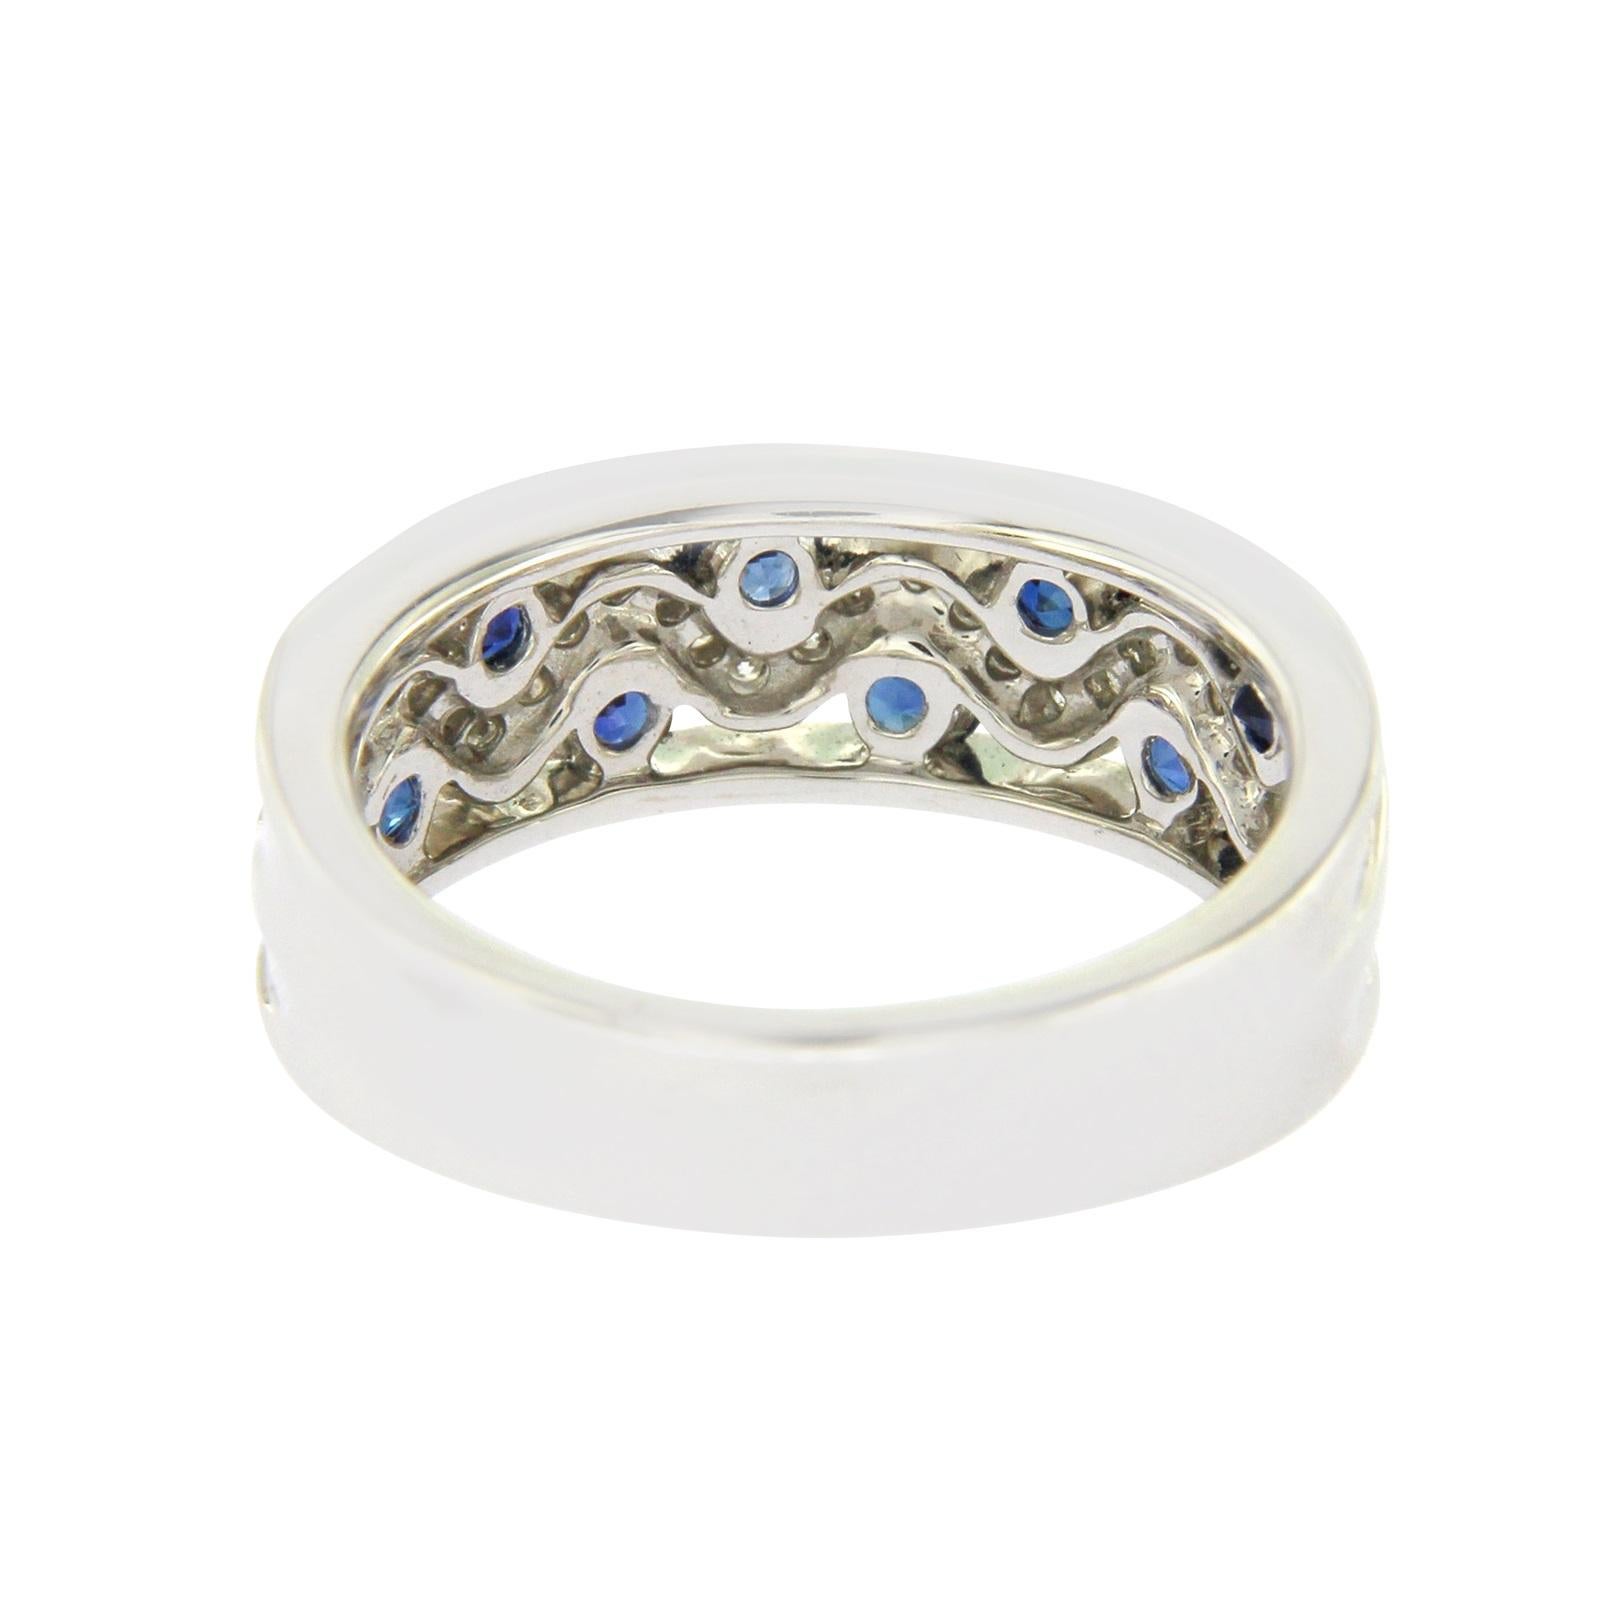 18 Karat Gold 0.26 Carat Diamonds and 1.20 Carat Blue Sapphire Wedding Band Ring In Excellent Condition For Sale In Los Angeles, CA